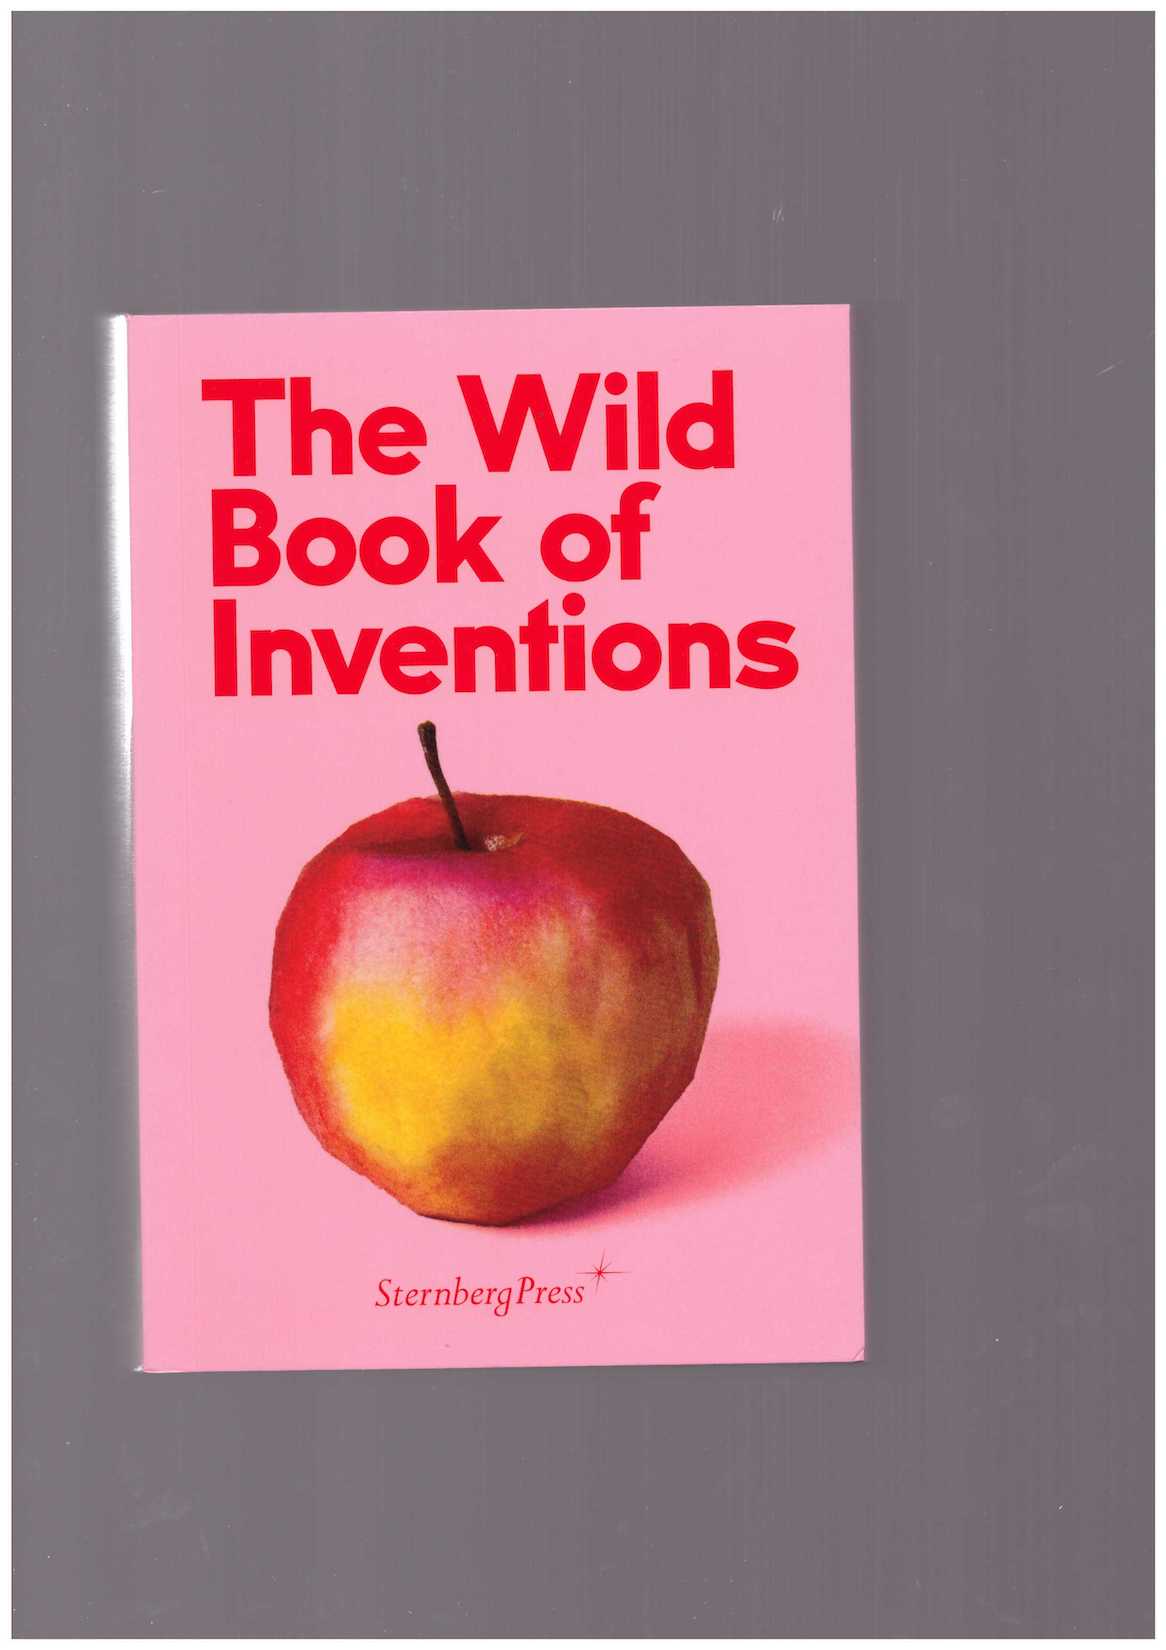 MARTÍNEZ, Chuz (ed.) - The Wild Book of Inventions